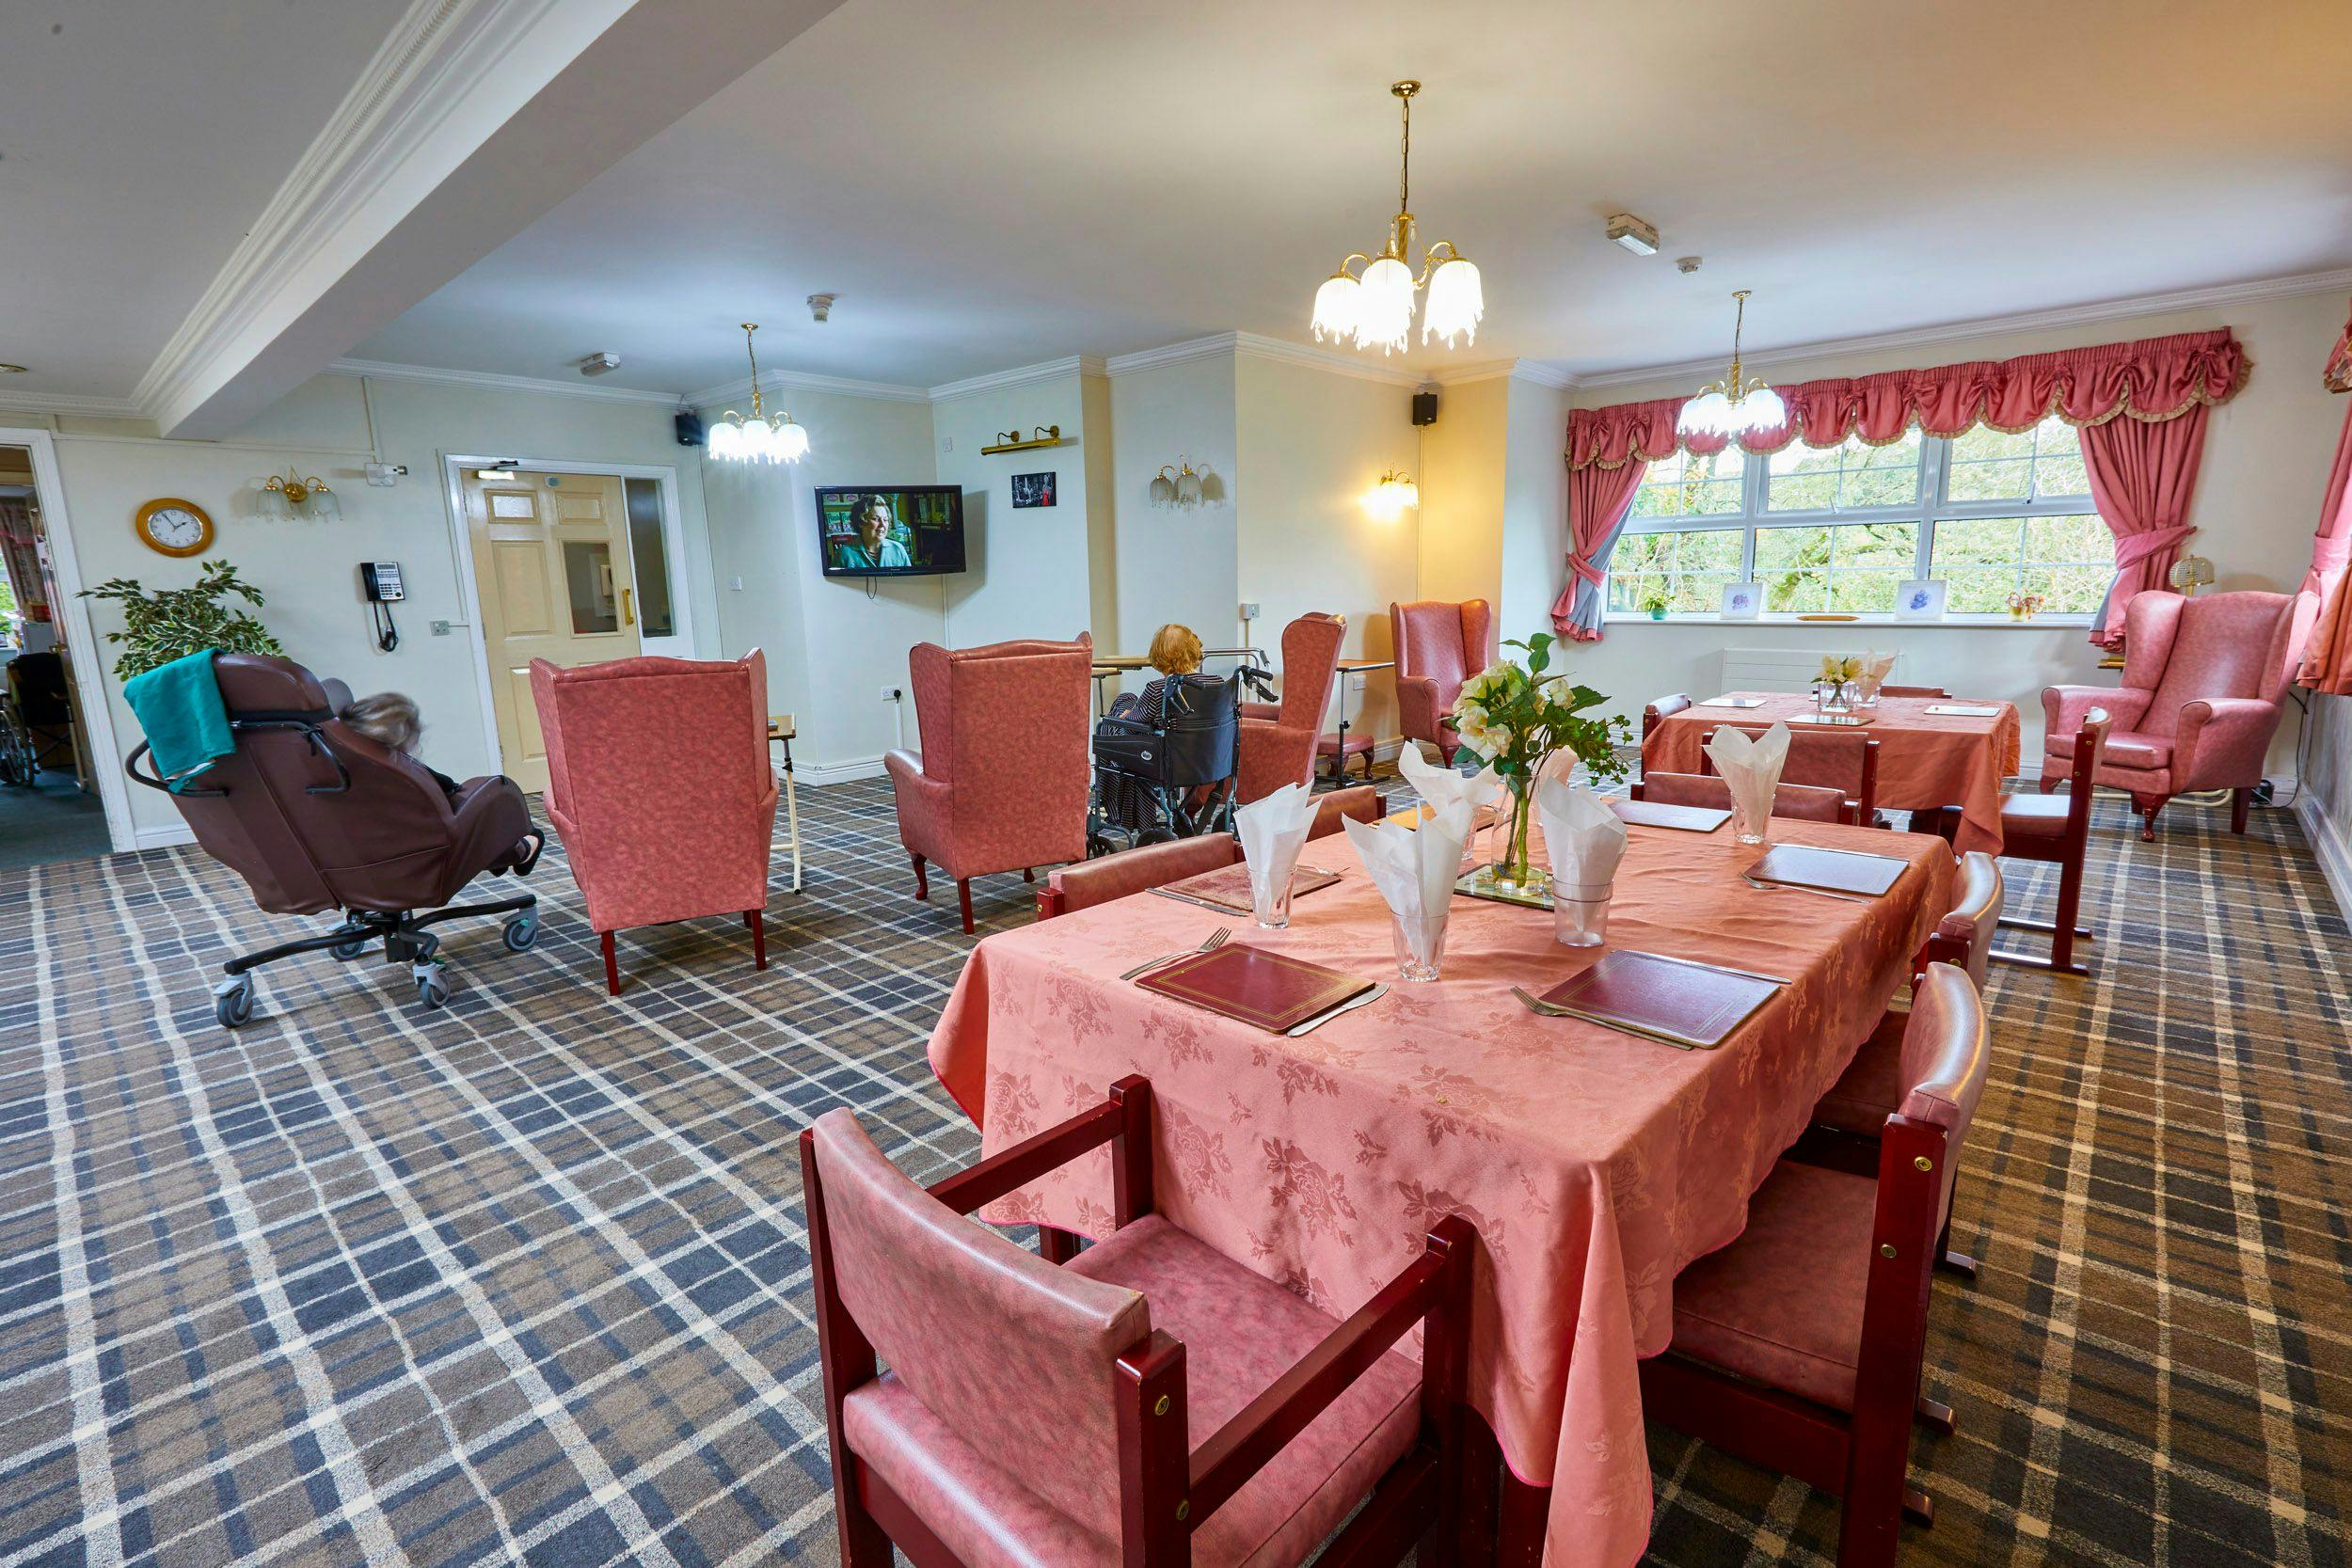 Marley Court care home